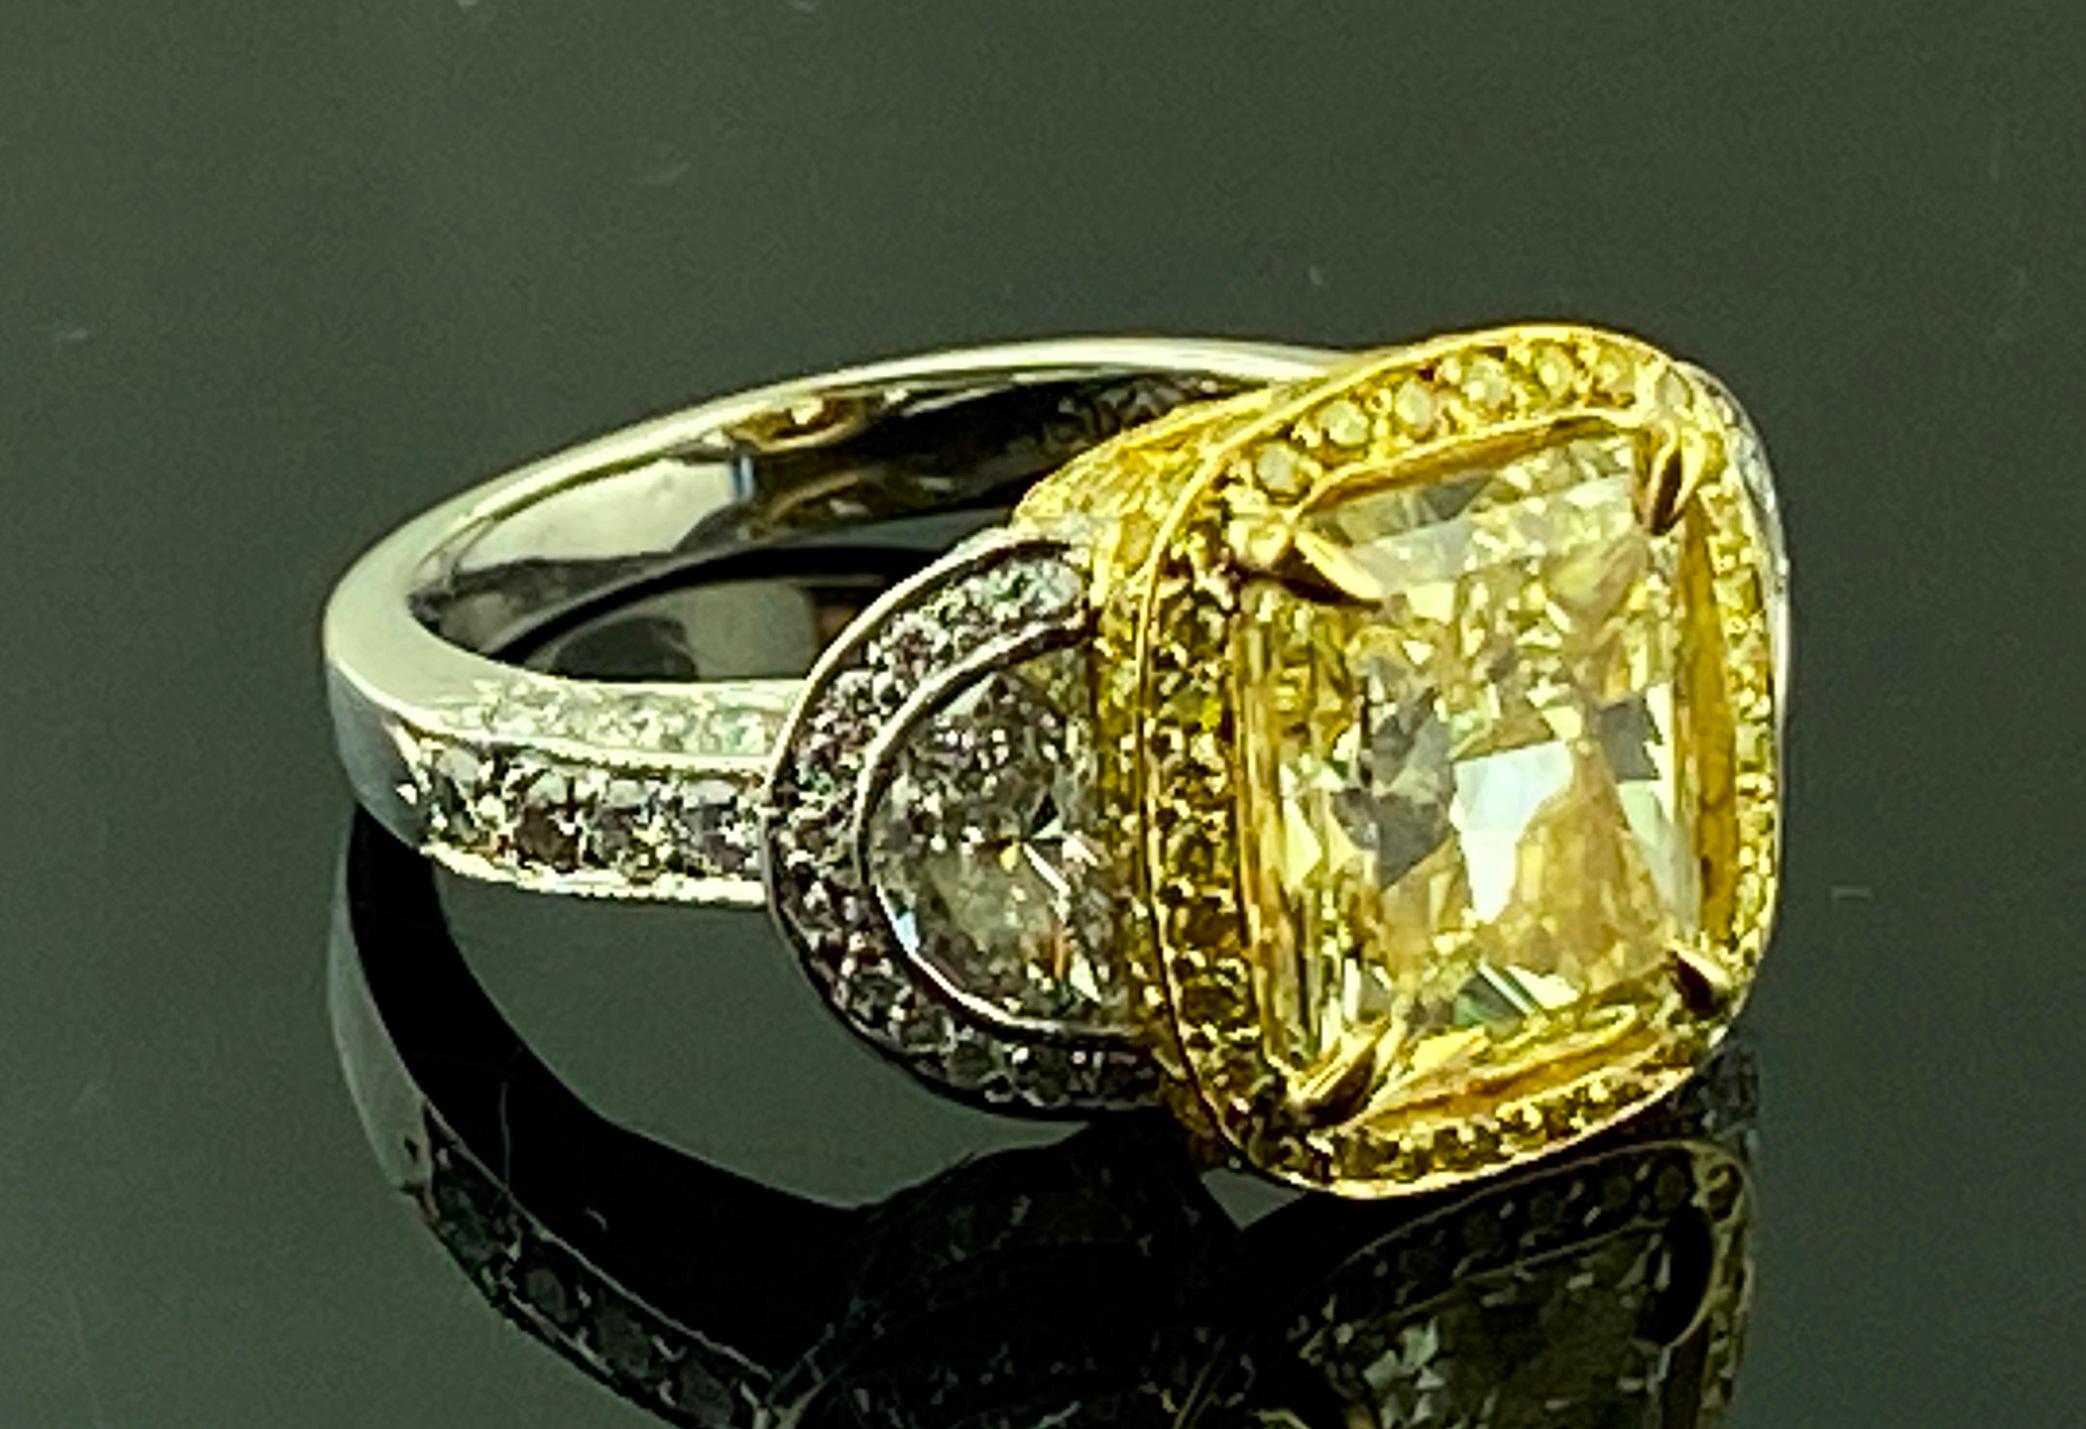 Platinum and 18 KT Yellow Gold 3.74 Ct Radiant Cut Fancy Yellow Diamond Ring For Sale 2